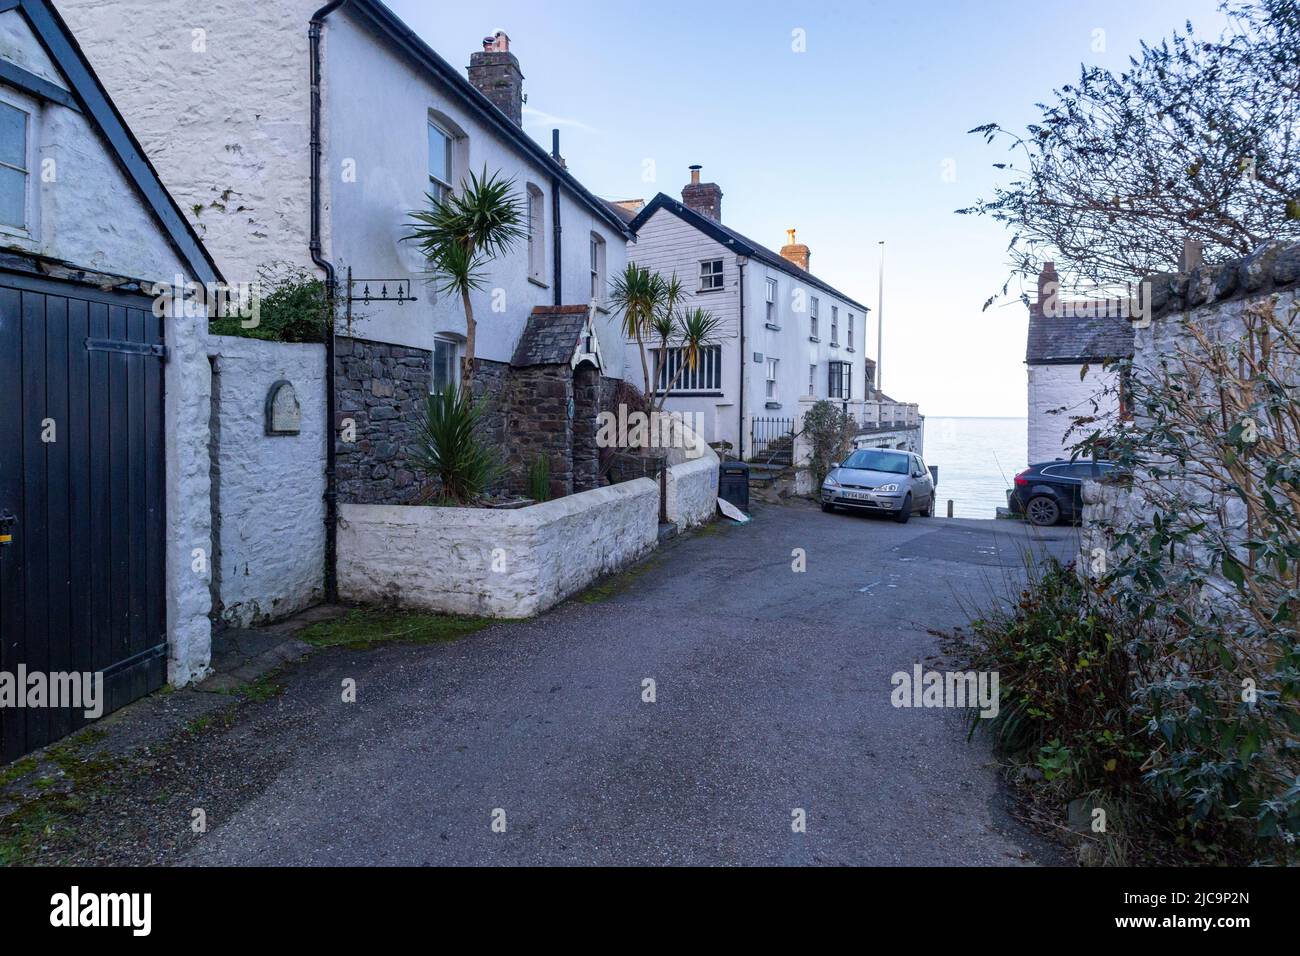 Bucks Mills Village on the North Devon Coast. Road Ends With Cottages and Glimpse of Atlantic Ocean. Stock Photo